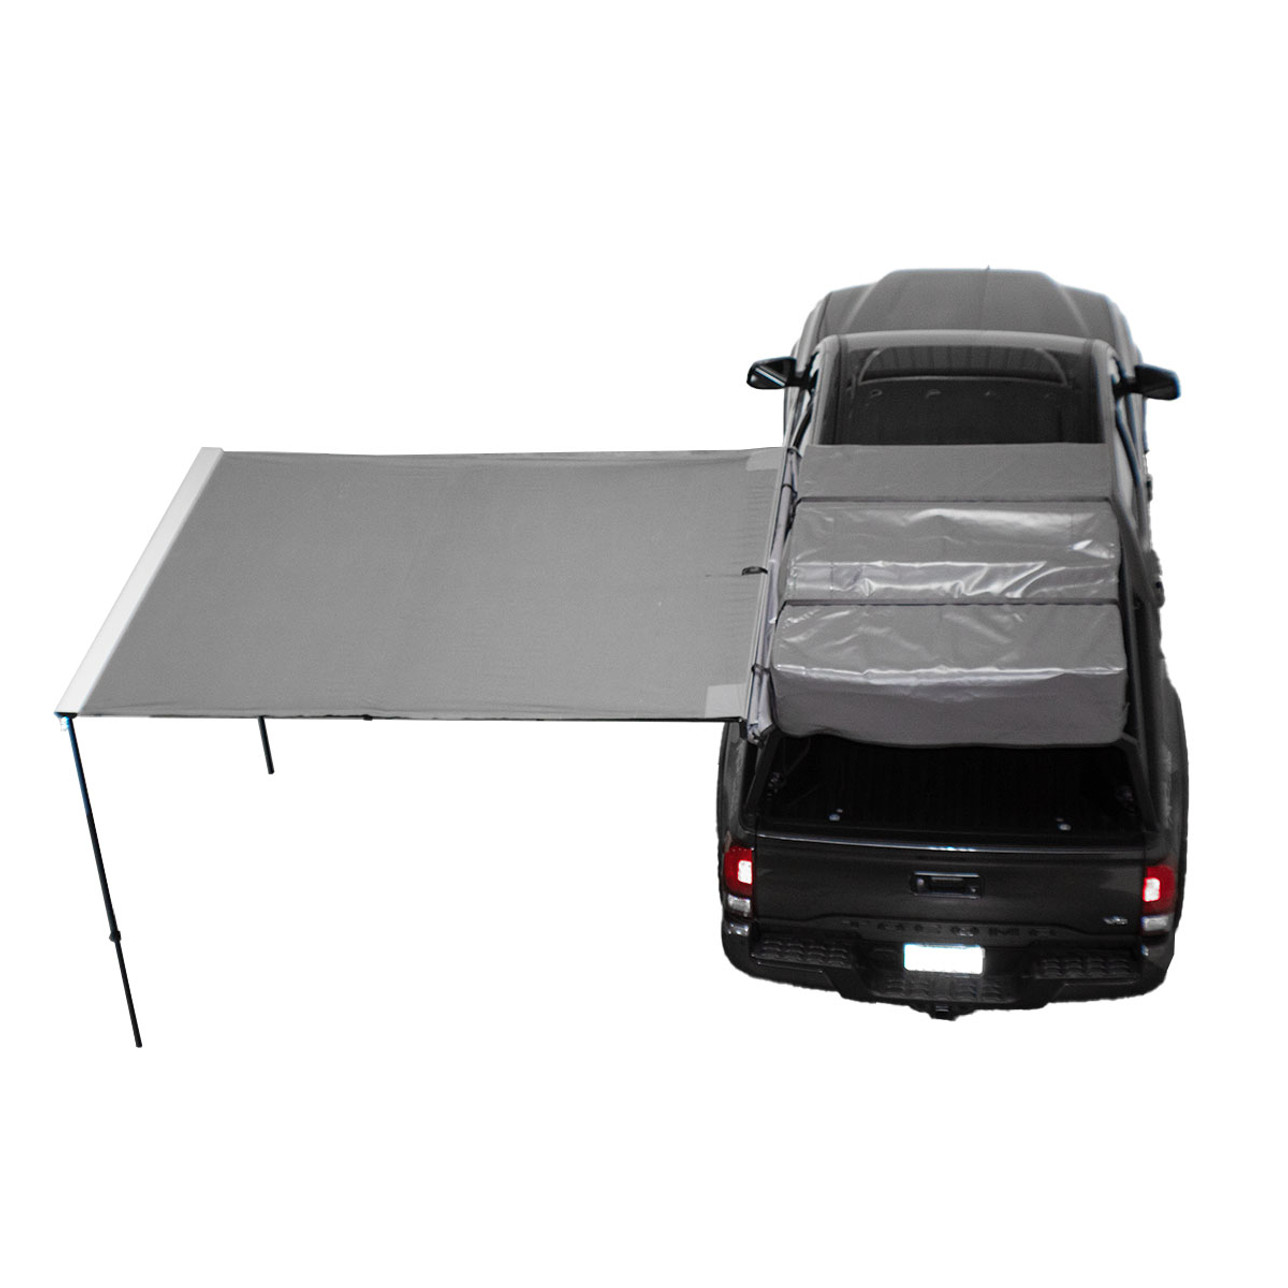 Nomadic Awning 2.5 - 8.0 ft. With Black Cover